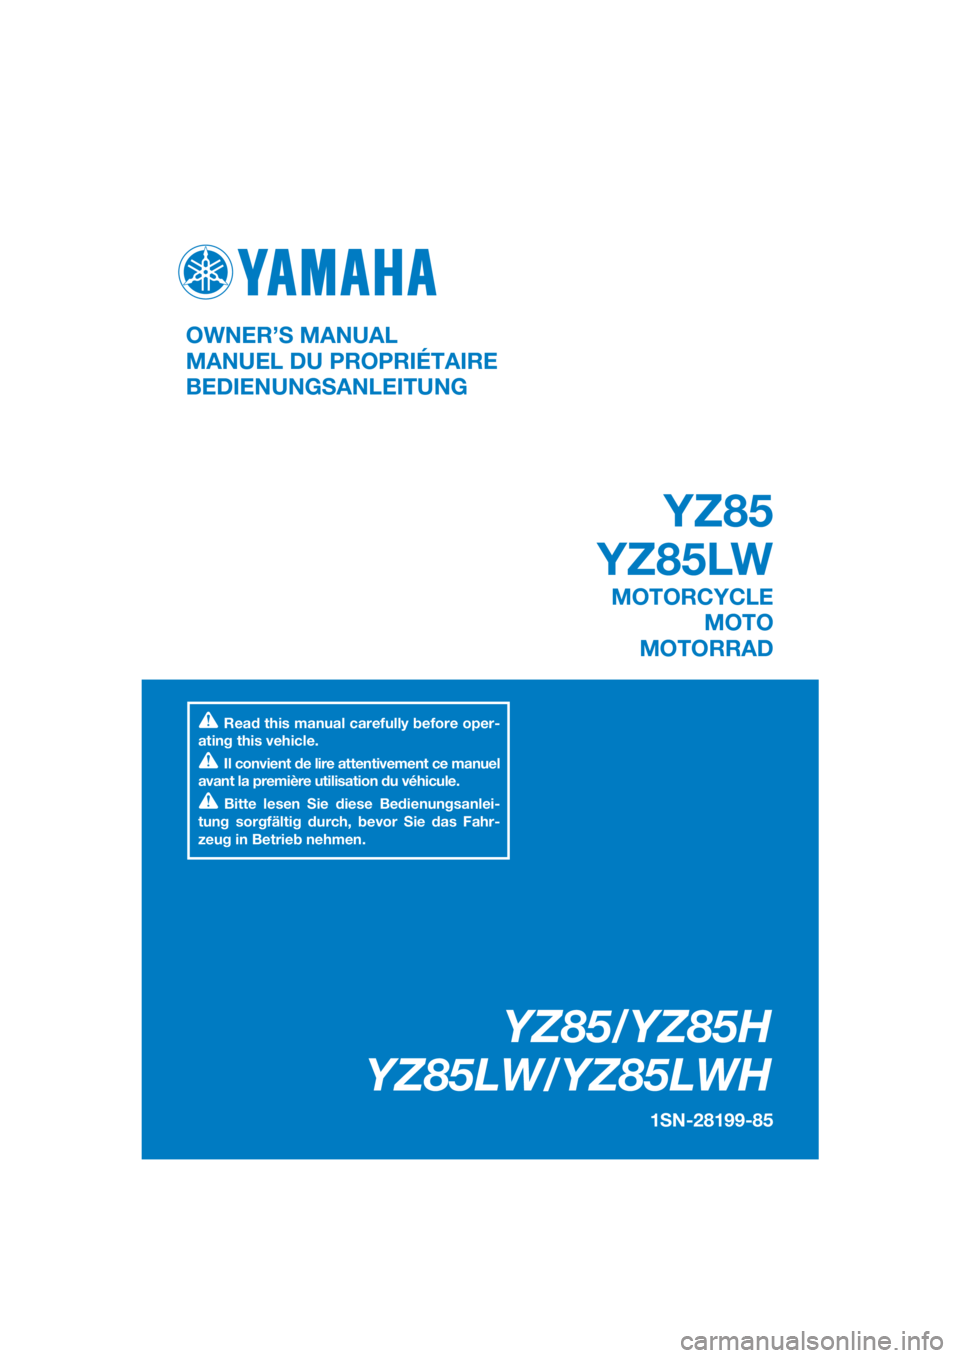 YAMAHA YZ85 2017  Owners Manual DIC183
YZ85/YZ85H
YZ85LW/YZ85LWH
1SN-28199-85
OWNER’S MANUAL
MANUEL DU PROPRIÉTAIRE
BEDIENUNGSANLEITUNG
Read this manual carefully before oper-
ating this vehicle.
Il convient de lire attentivement